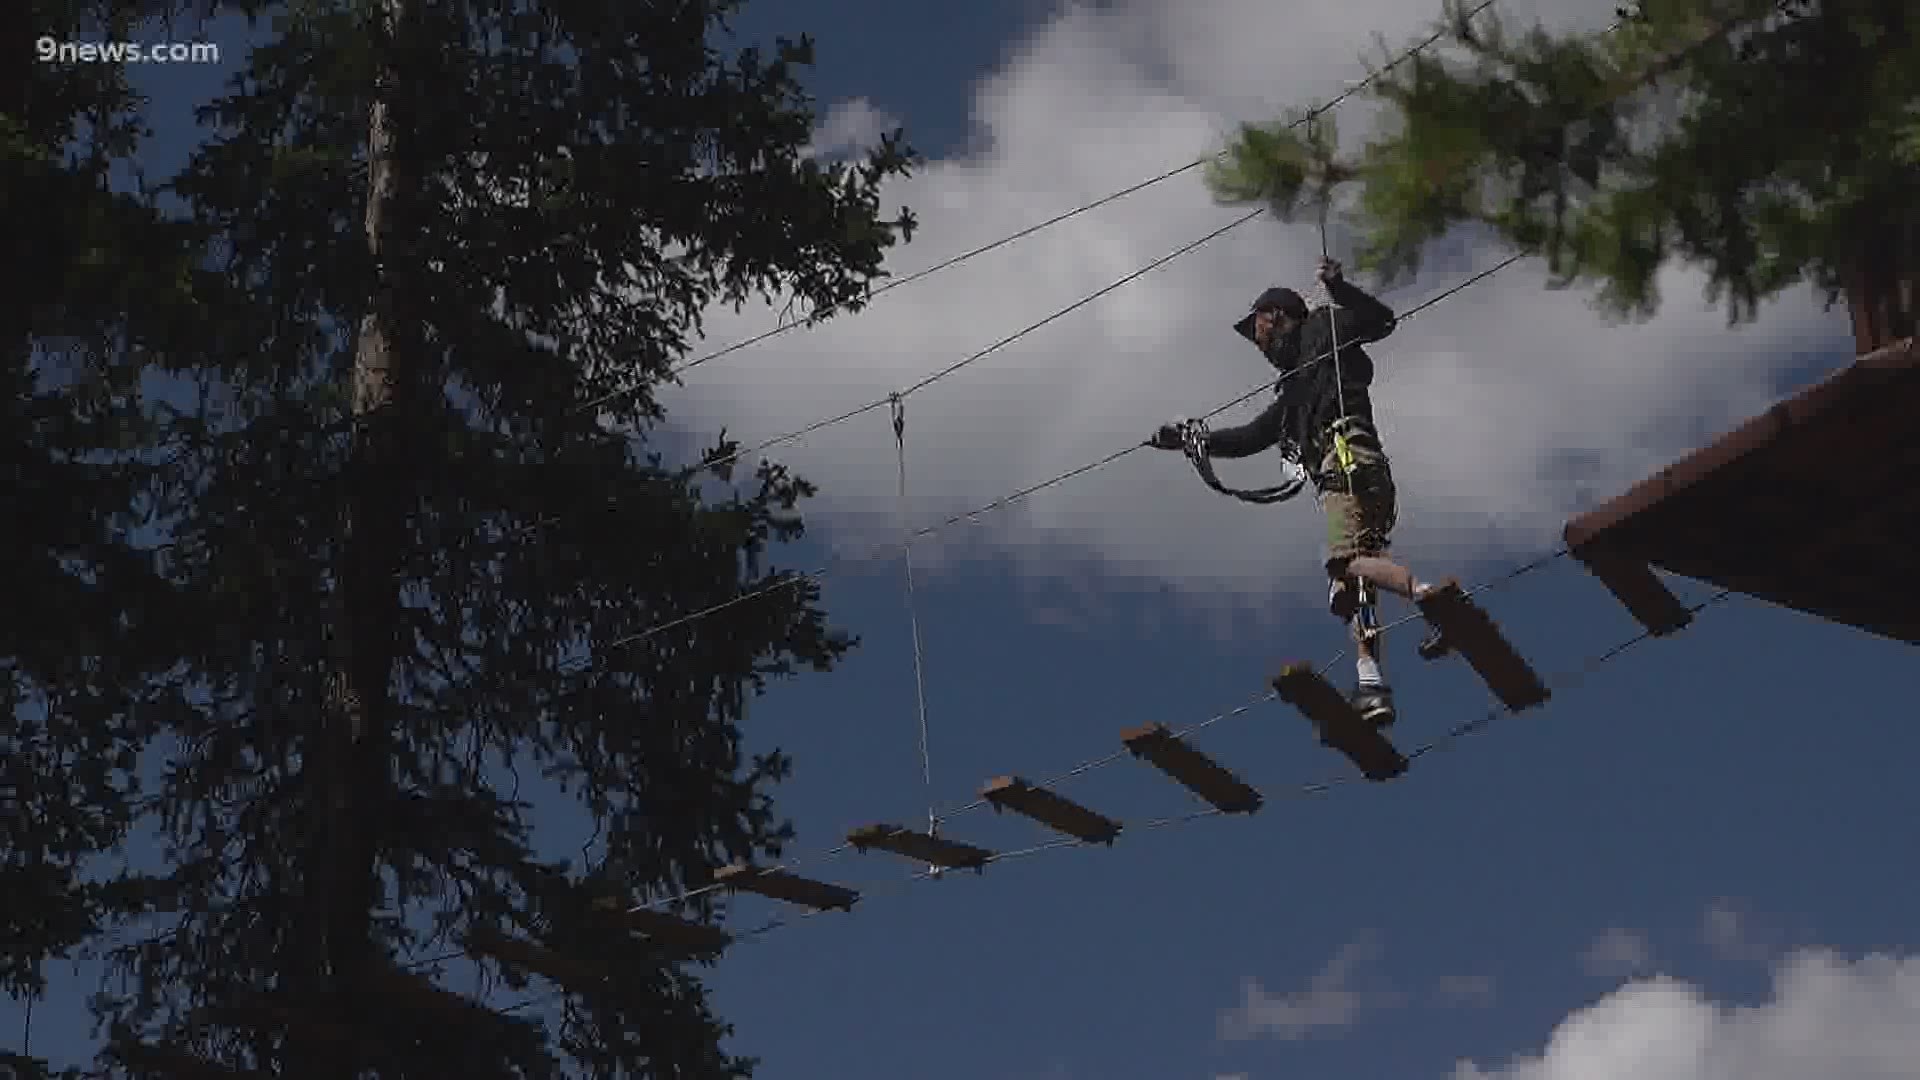 Arapahoe Basin has just opened a new Aerial Ropes course and it has people clipping in and flying through the tree’s above the ski area.